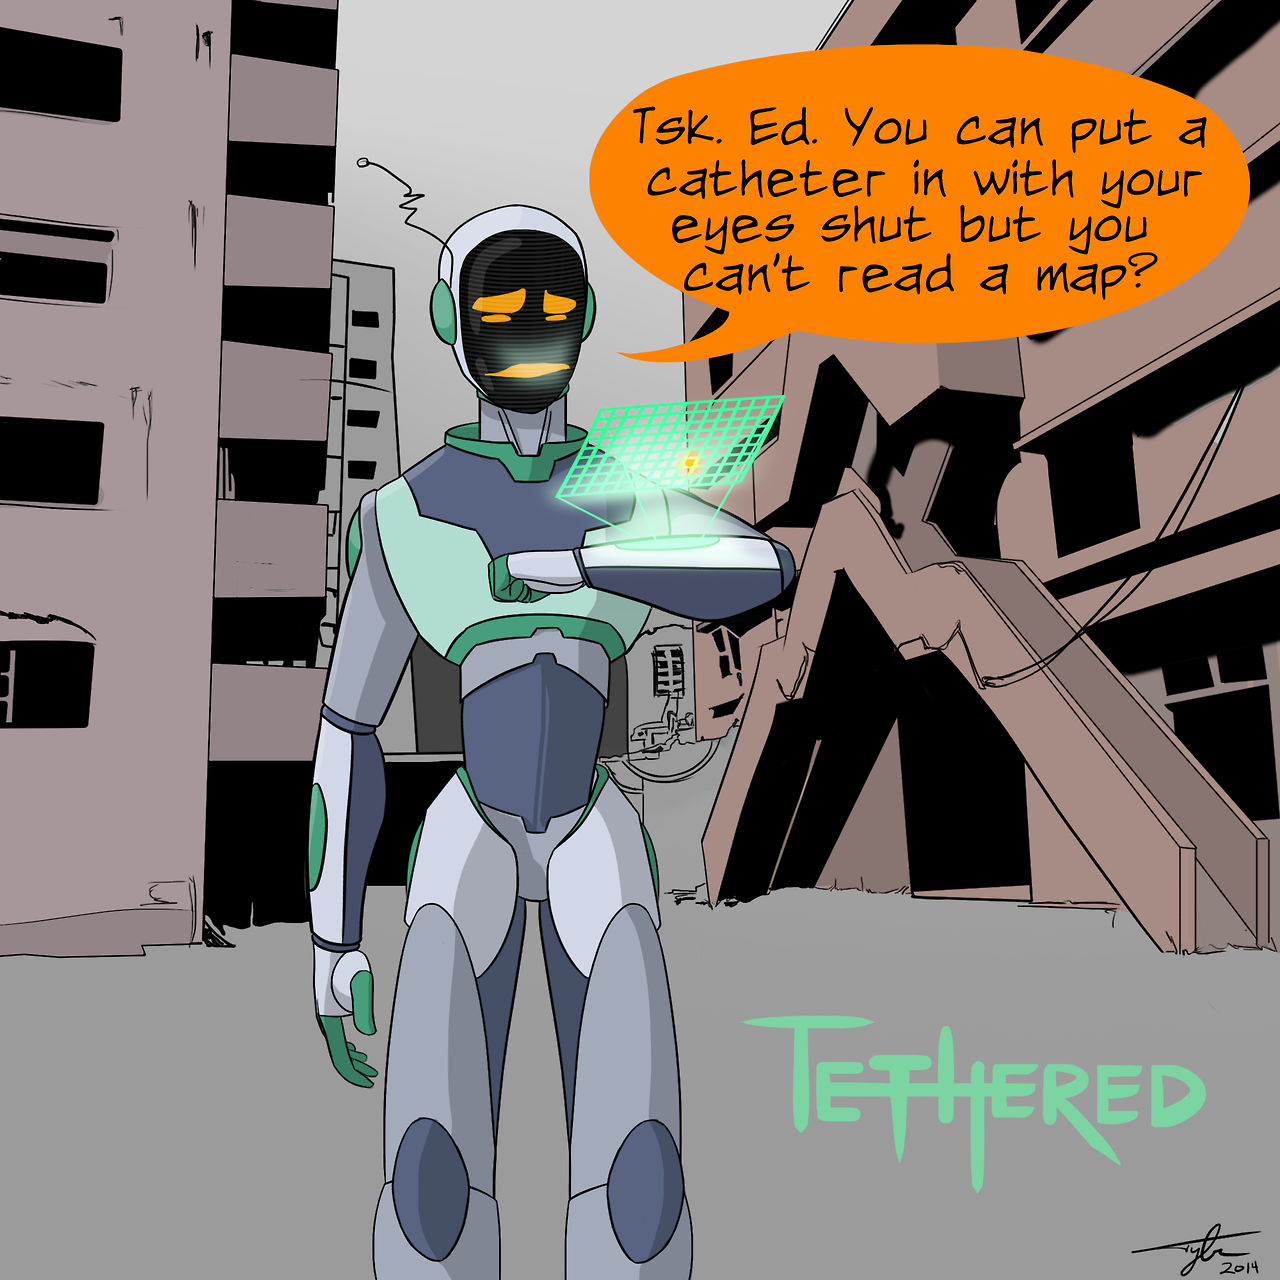 Tethered – Ed Can’t Read Maps – by Tyler Anderson